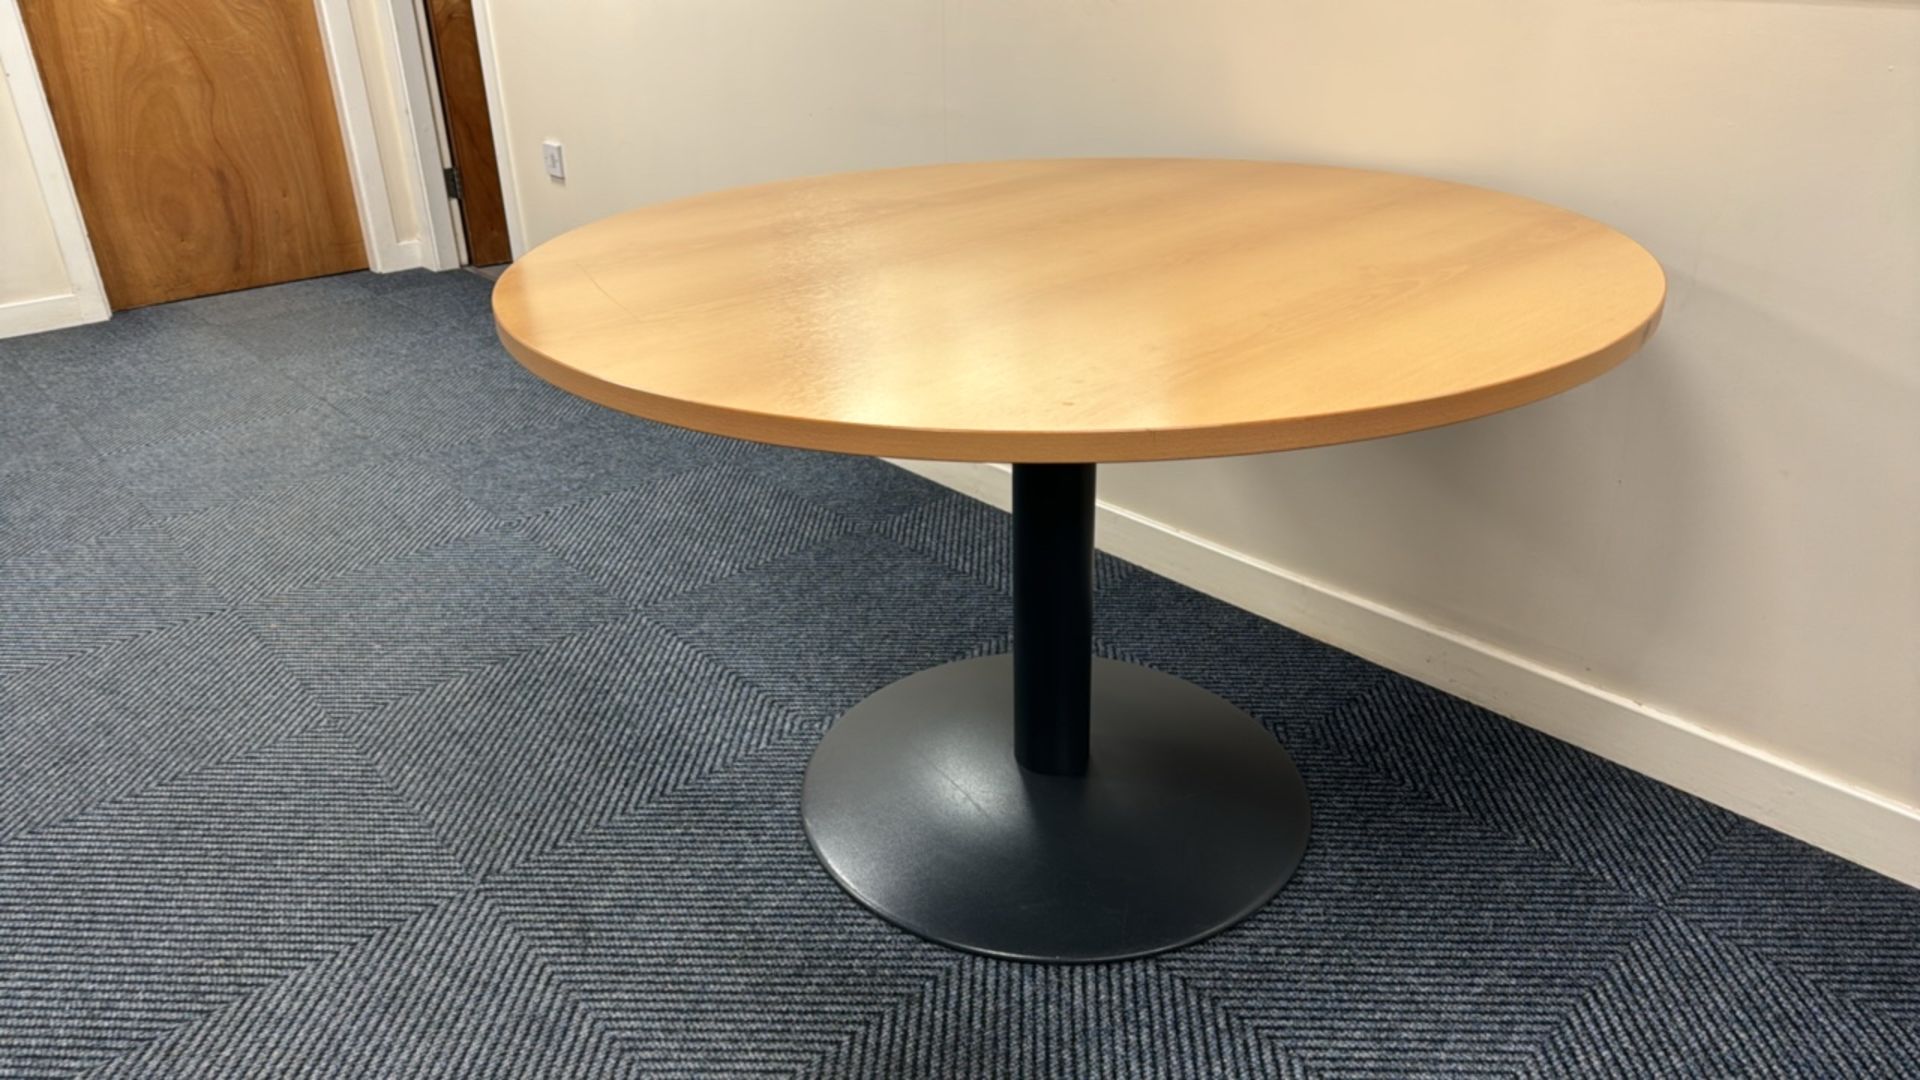 ref 298 - Circular Pine Effect Table - Image 2 of 3